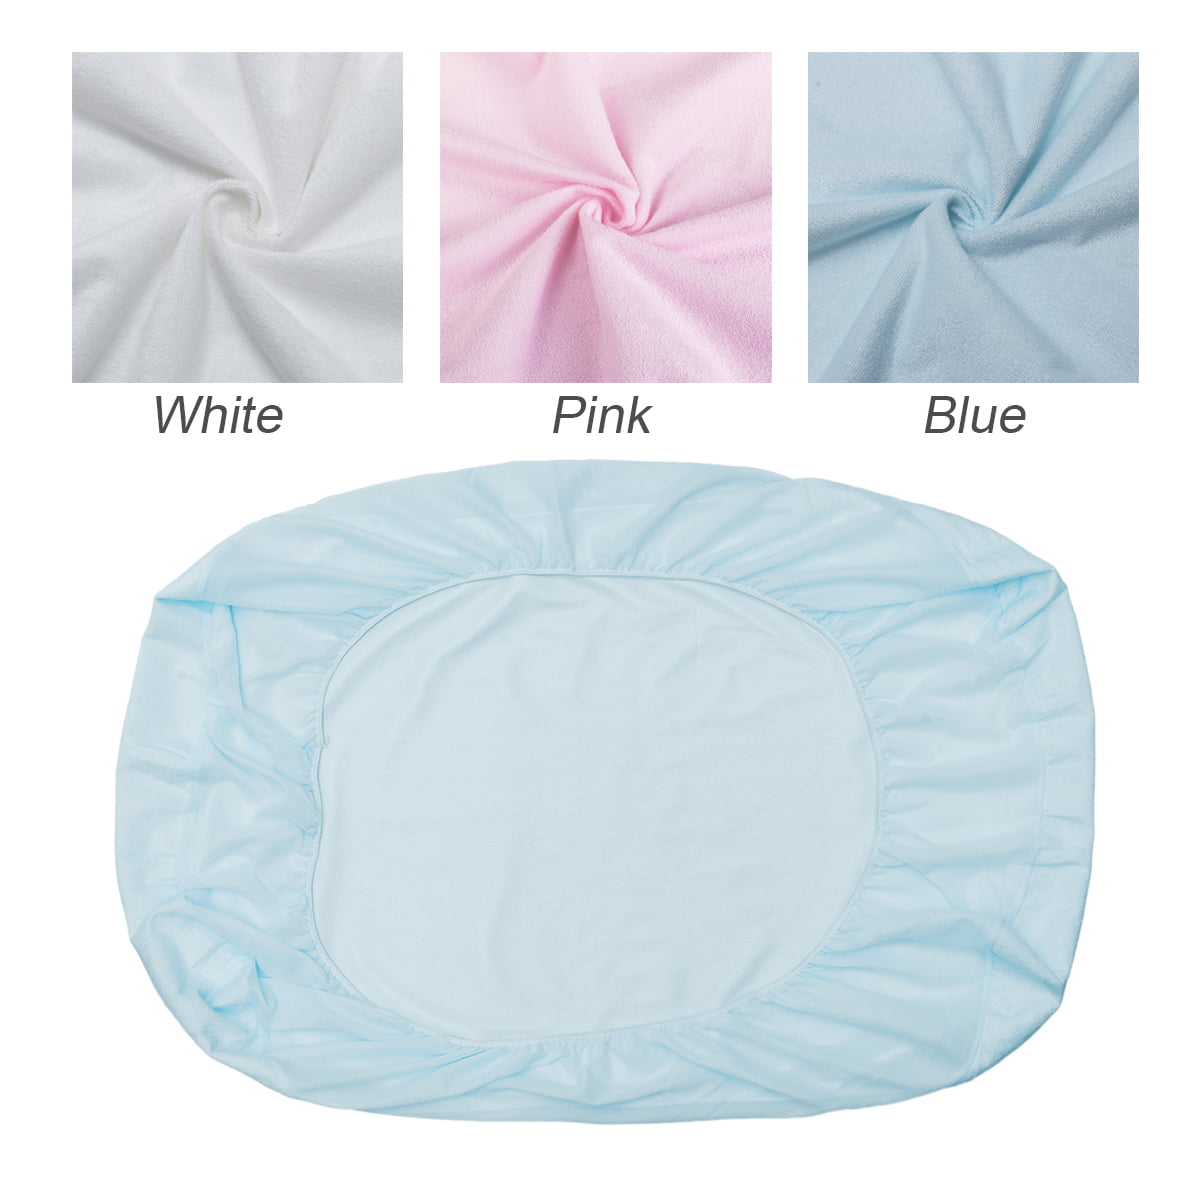 waterproof bed cover for baby